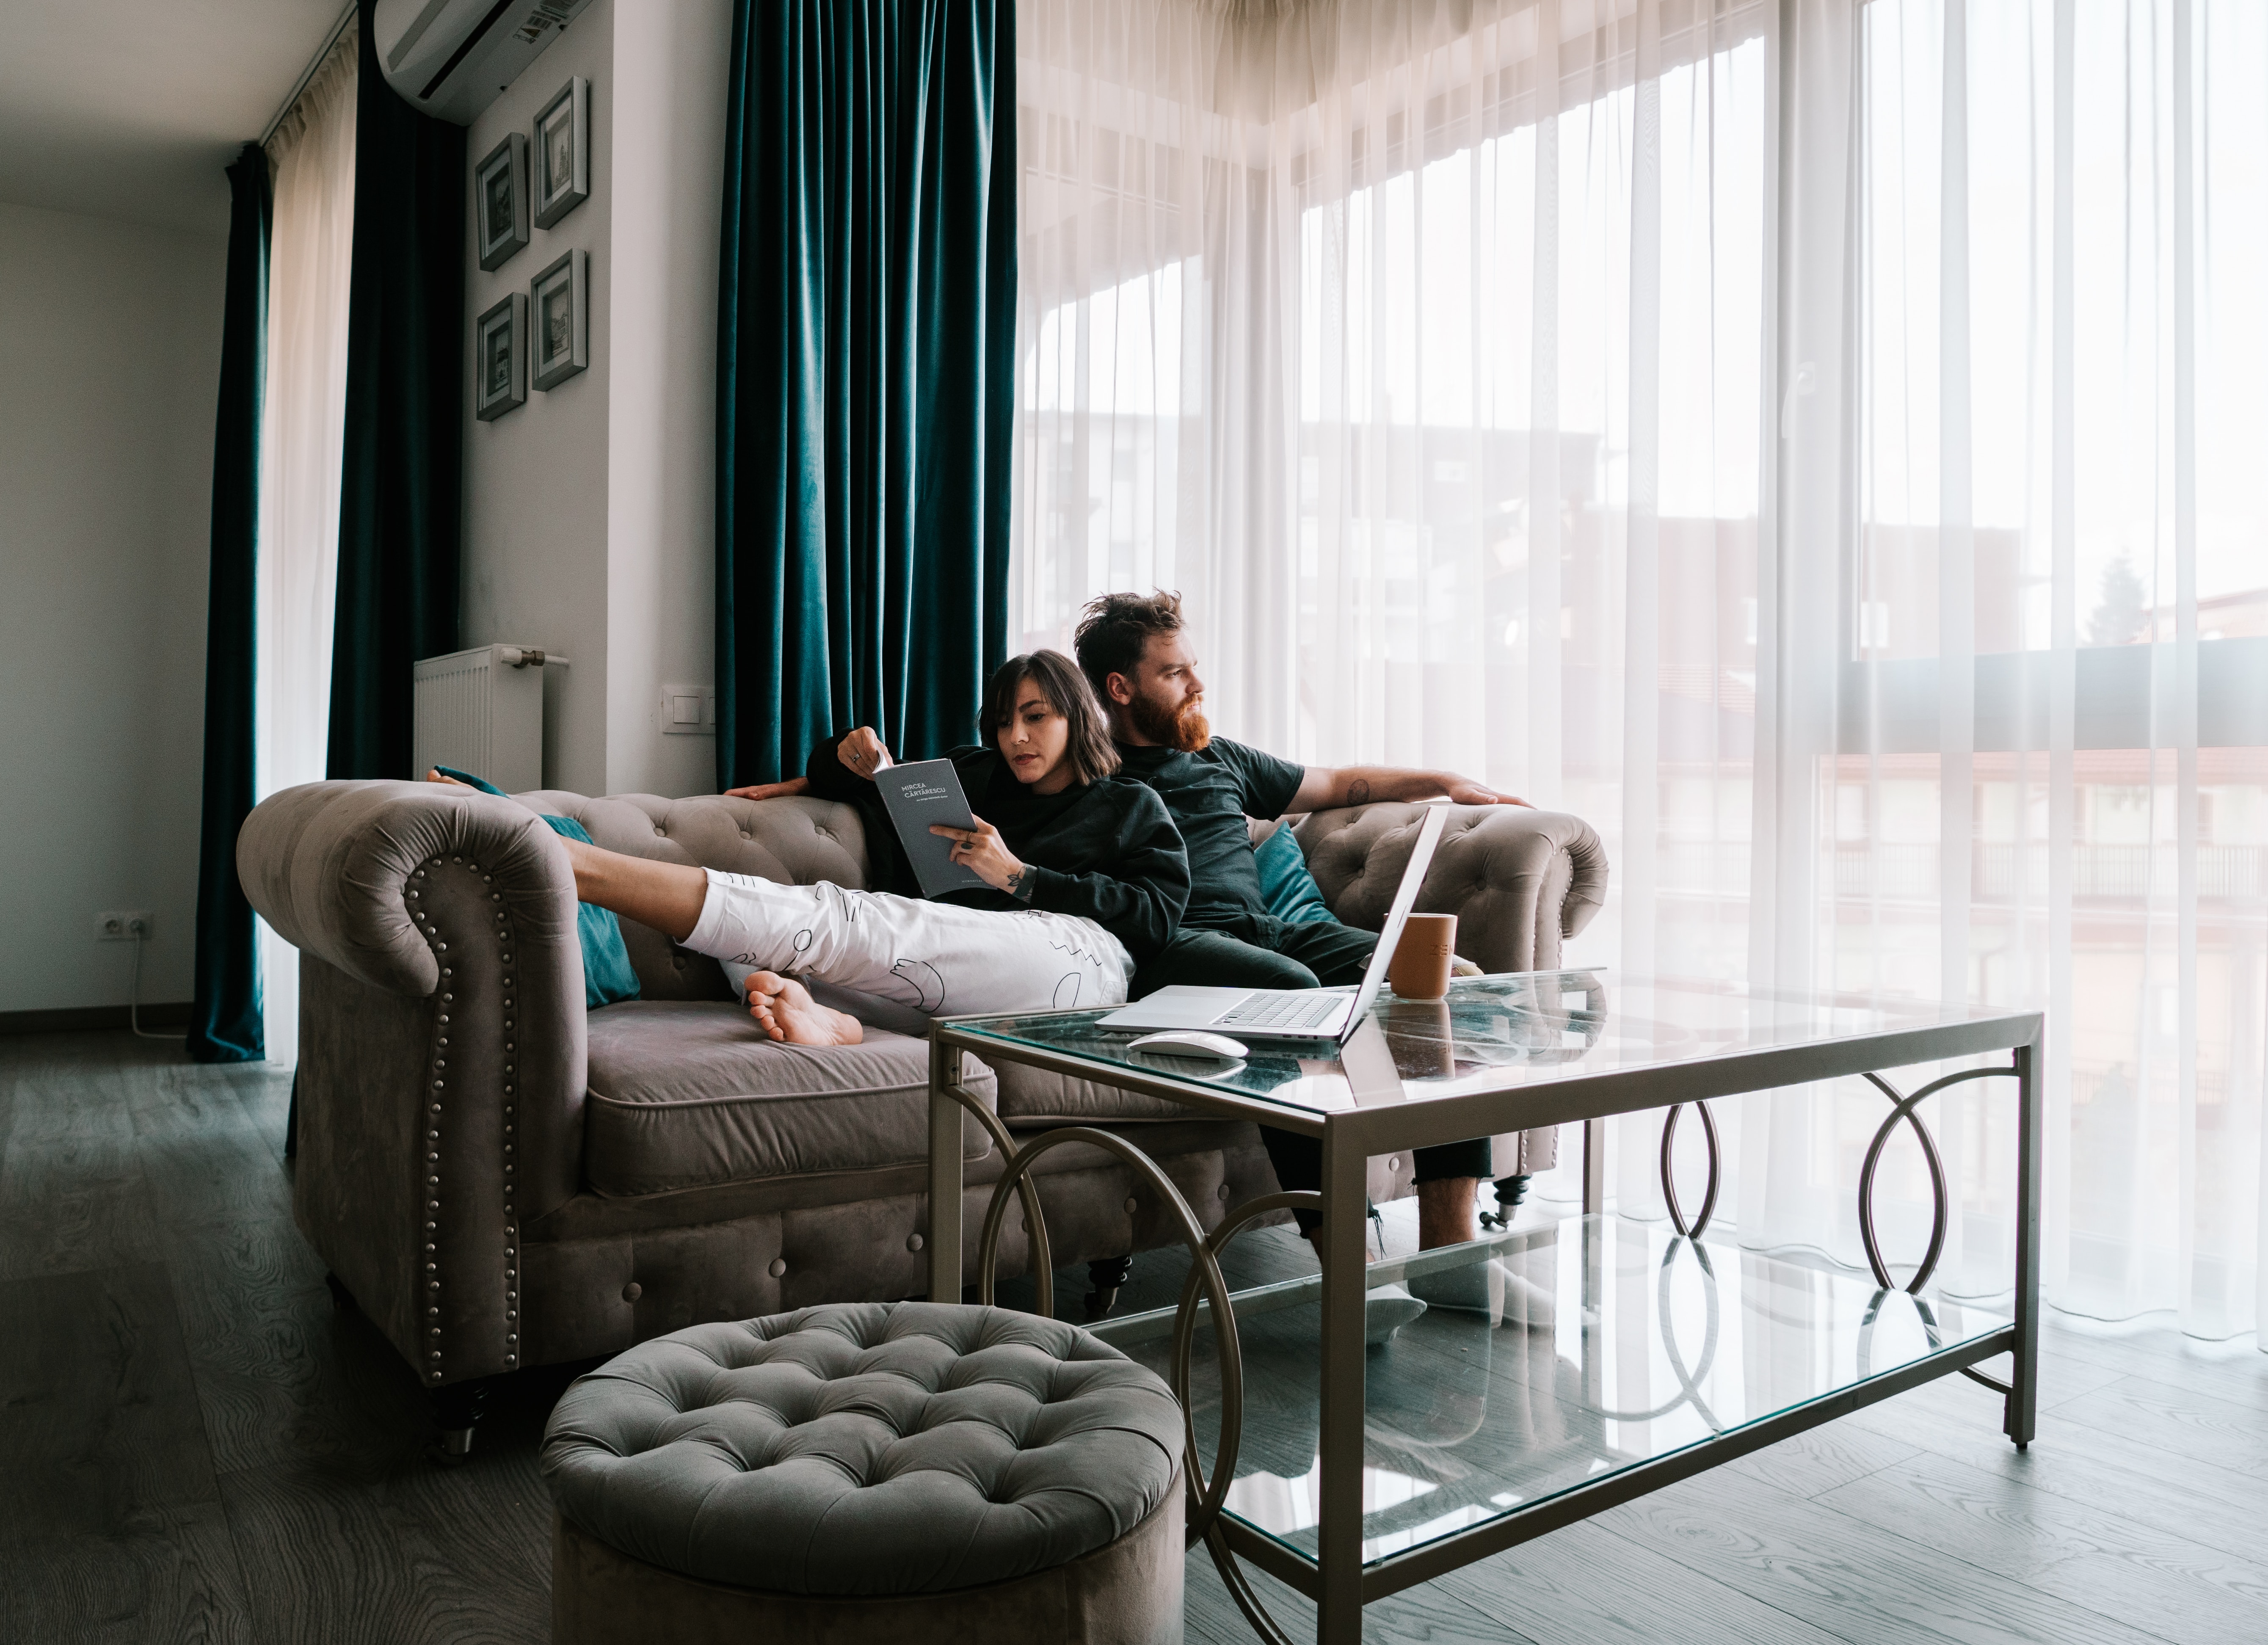 A photo of a couple sitting on a couch | Source: Unsplash